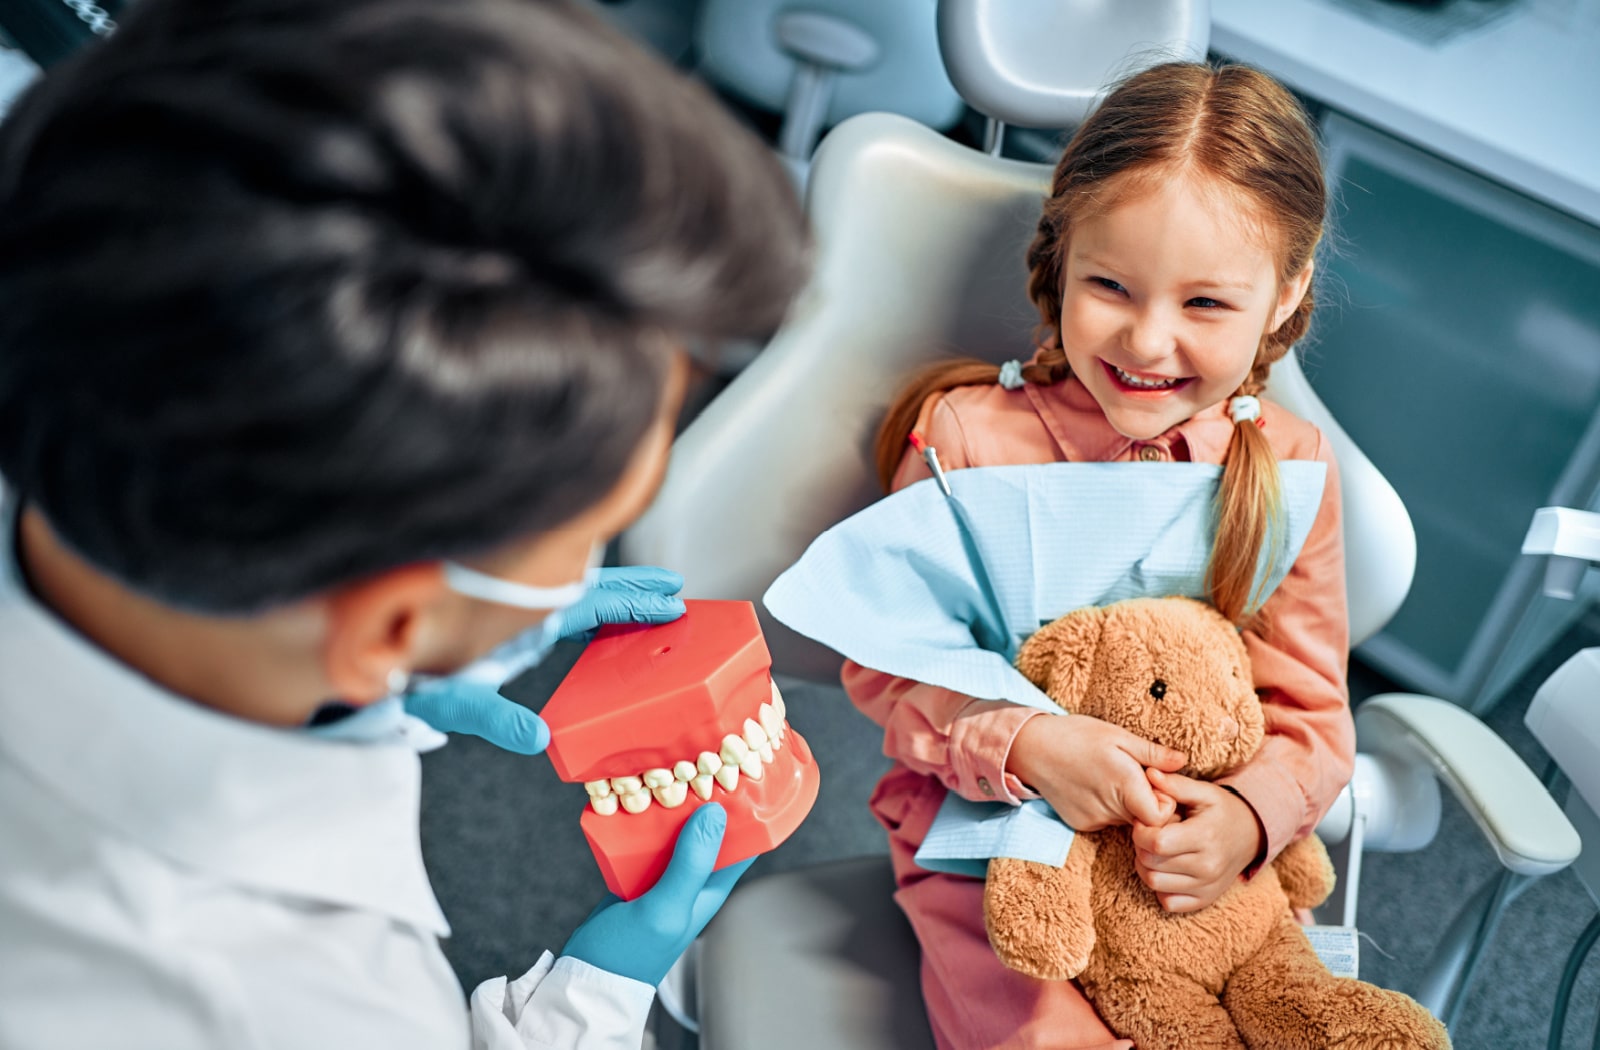 A dentist showing a model of a teeth to a happy child holding a stuffed animal.